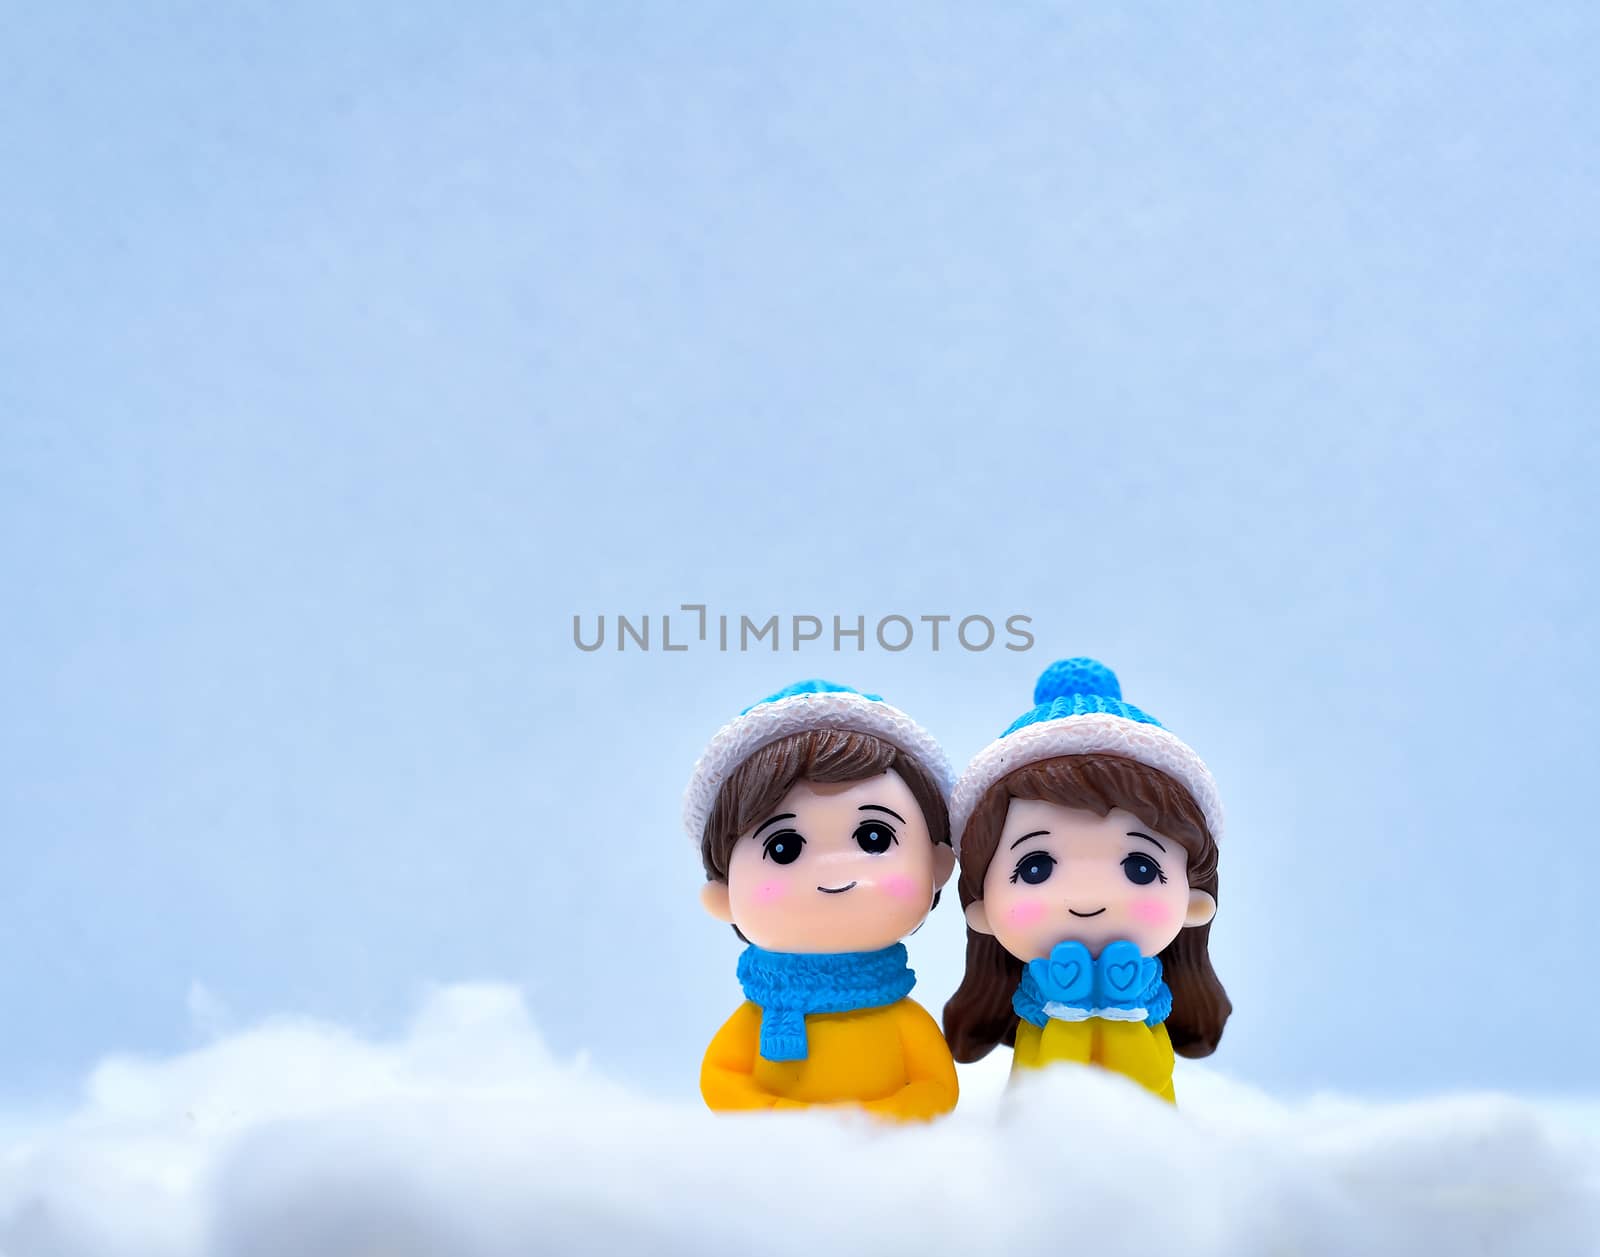 Tourism and travel concept: Miniature people enjoying winter snow with isolated background